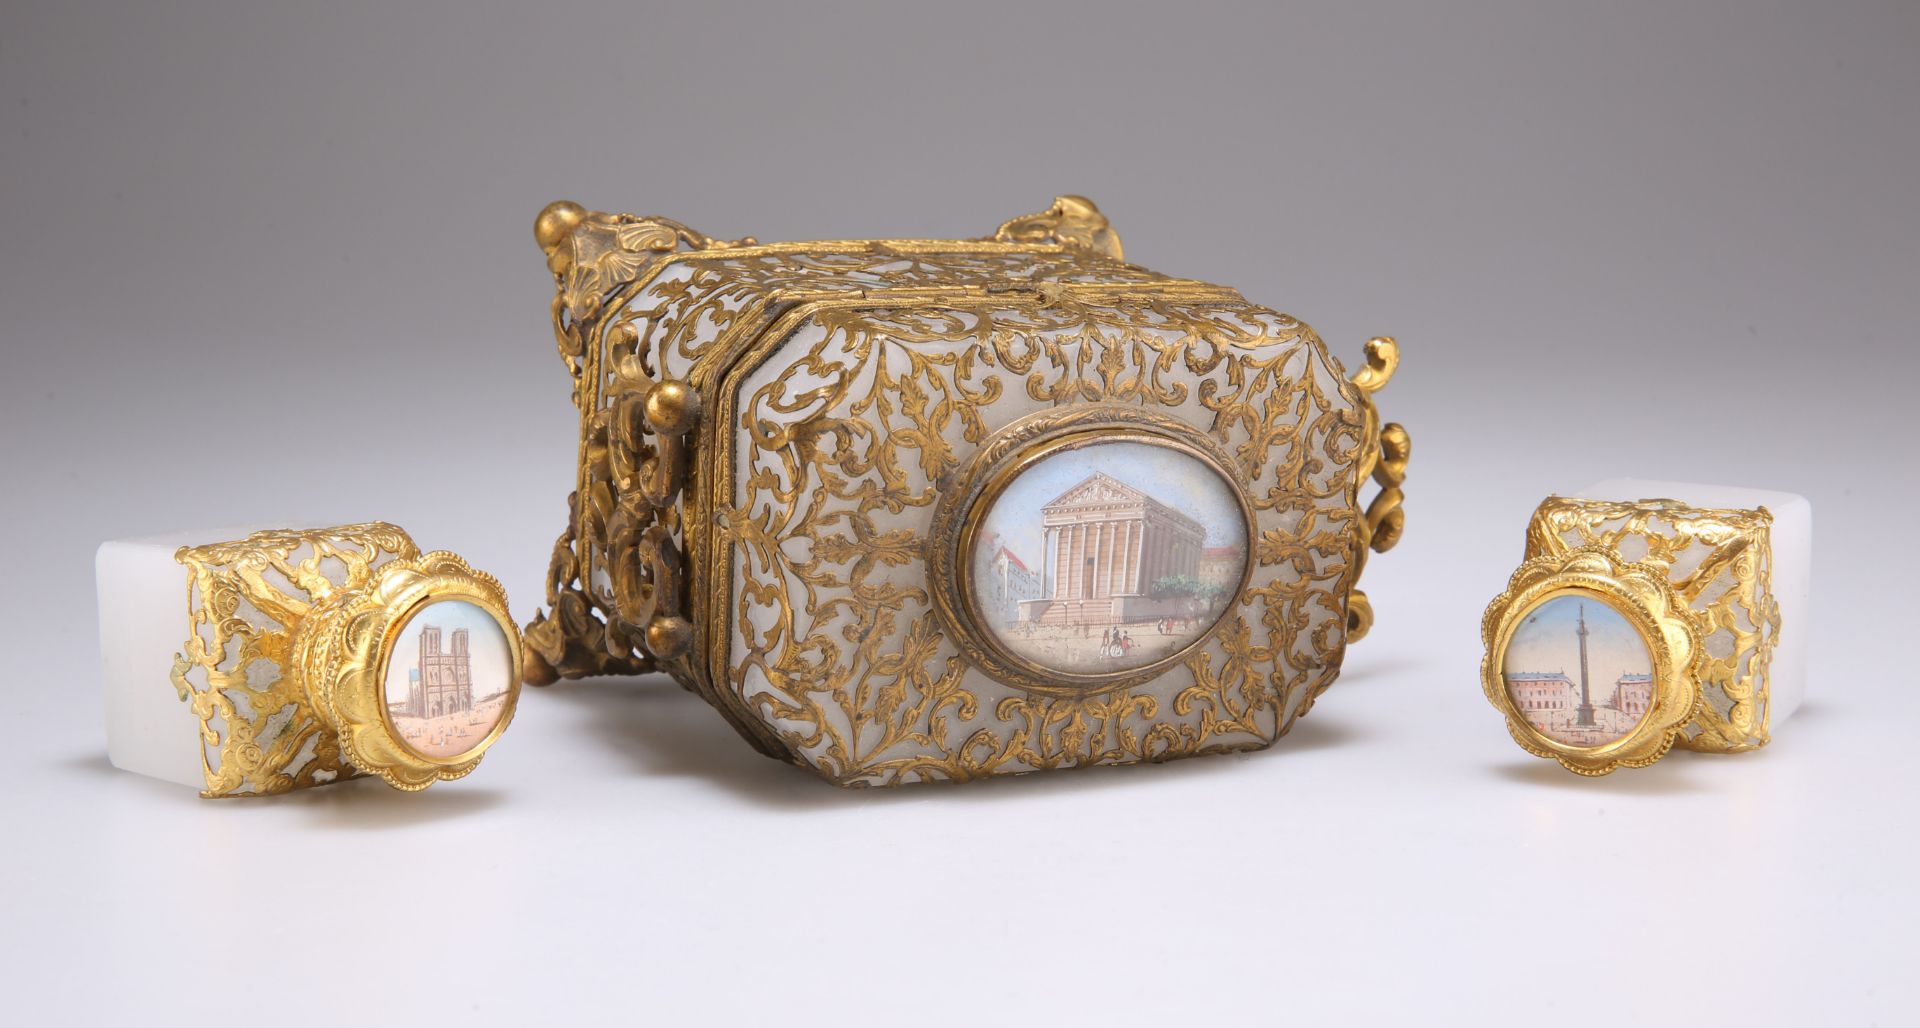 A CONTINENTAL GILT-METAL MOUNTED OPALINE GLASS SCENT BOTTLE CASKET - Image 3 of 3